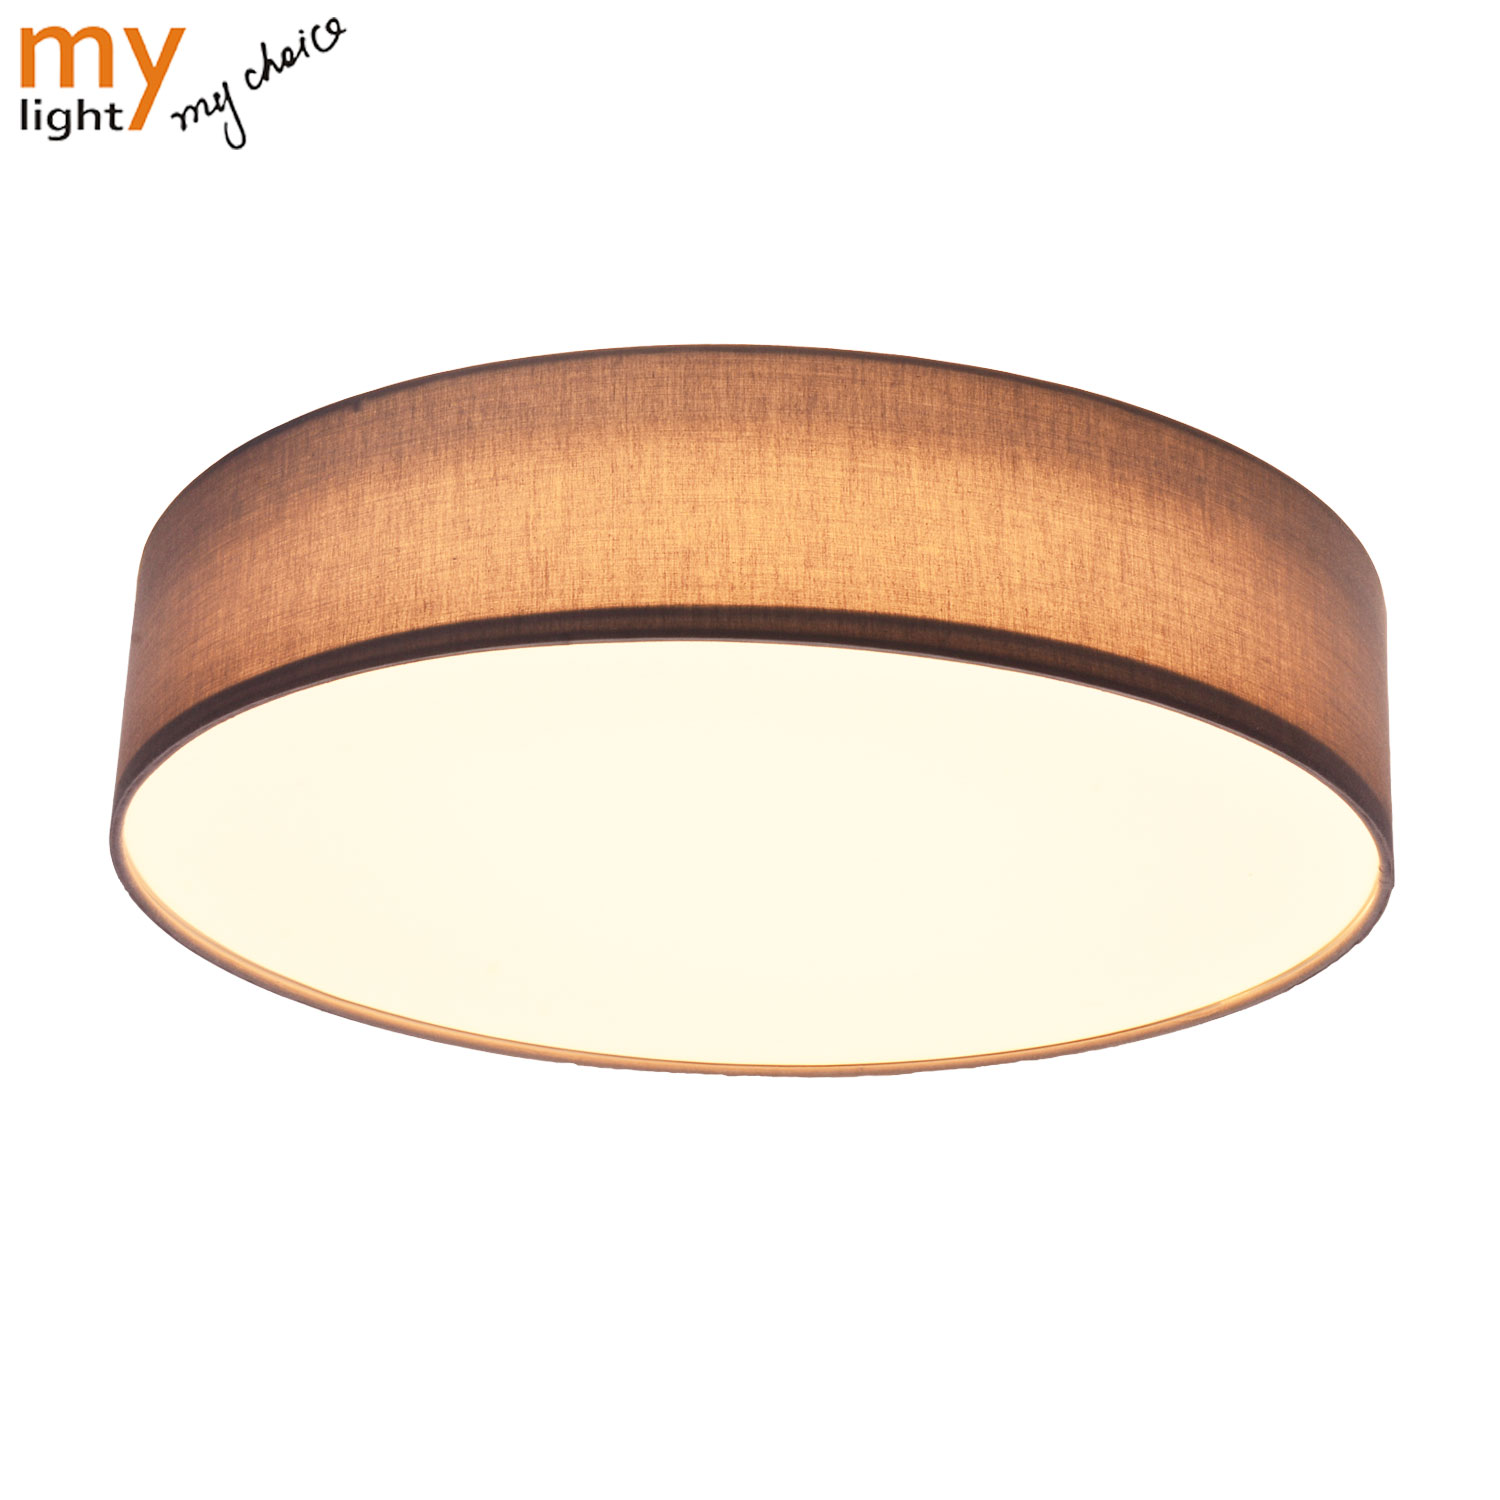 45*45CM 24W Round LED Magnetic Ceiling Light With GU10/GX53 Socket